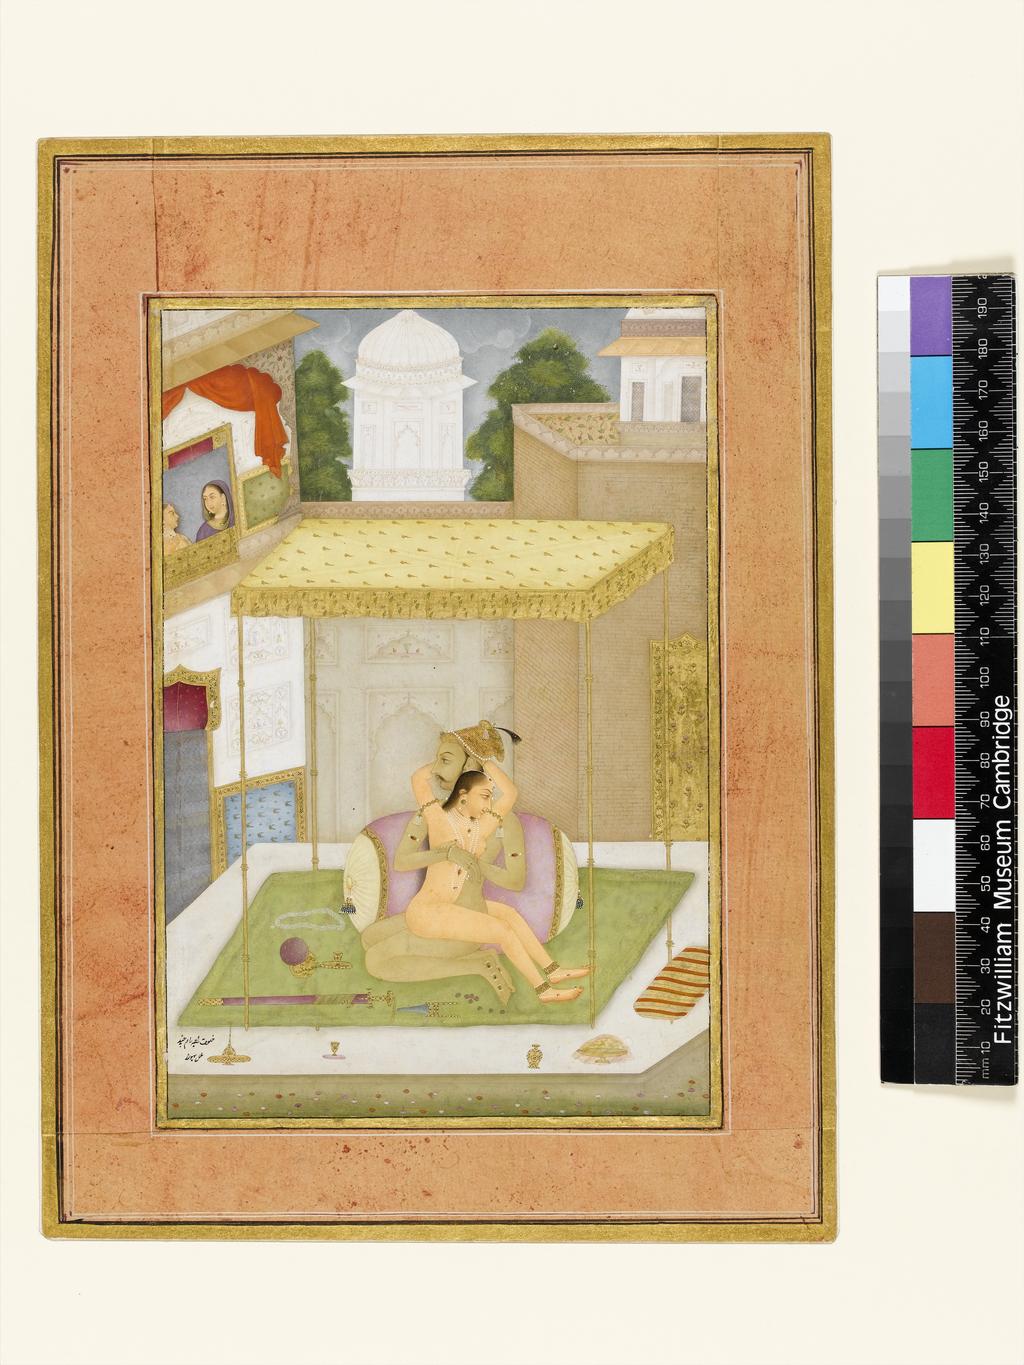 An image of The private pleasure of the Raja Ram Chand, by Bhura. Bodycolour including white, pen and ink with gold on paper, height 198mm, width 134mm, circa 1678.